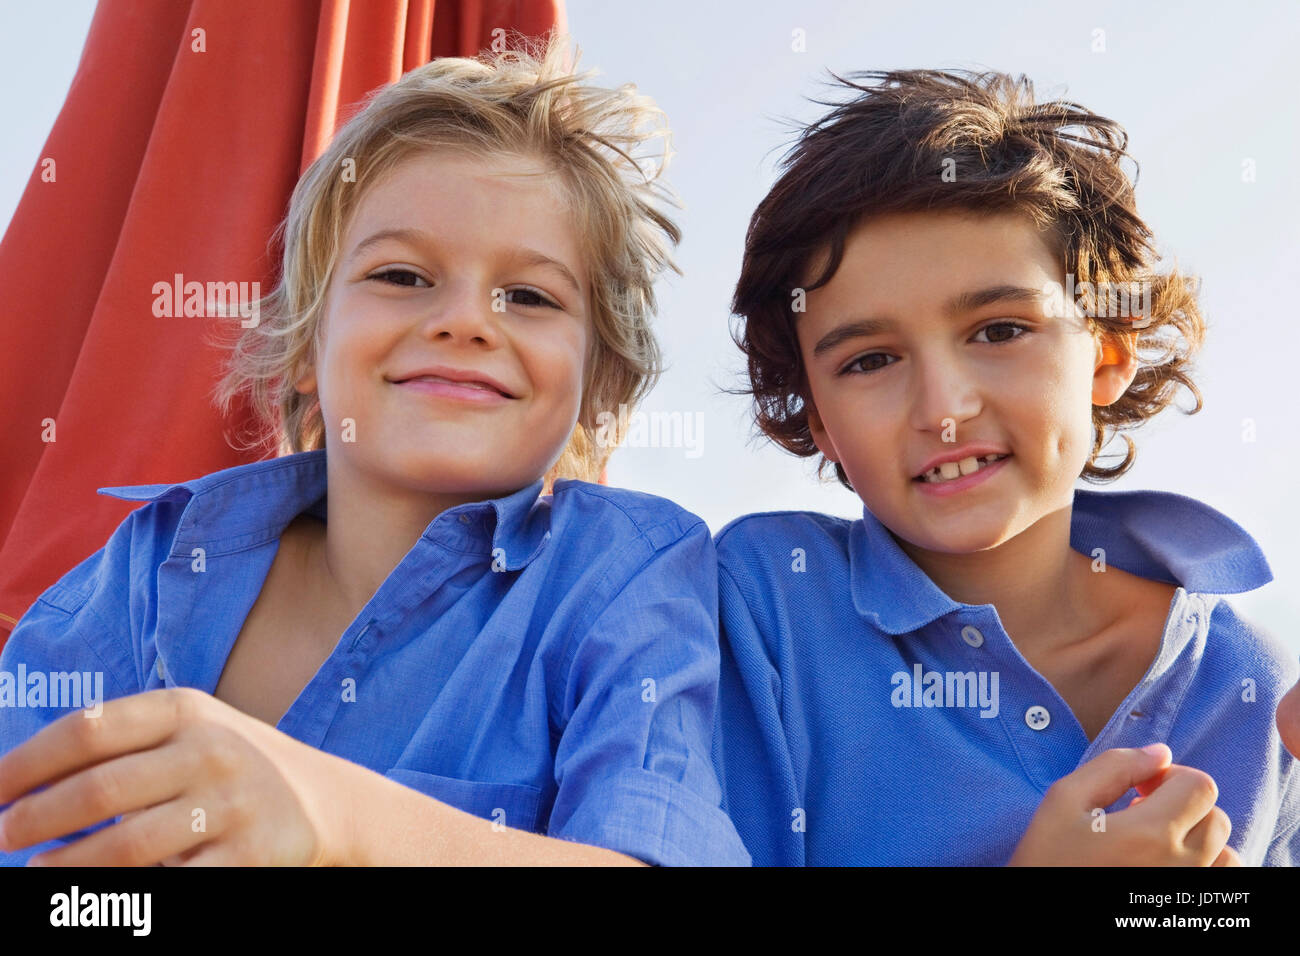 Portrait of two relaxed kids smiling Stock Photo